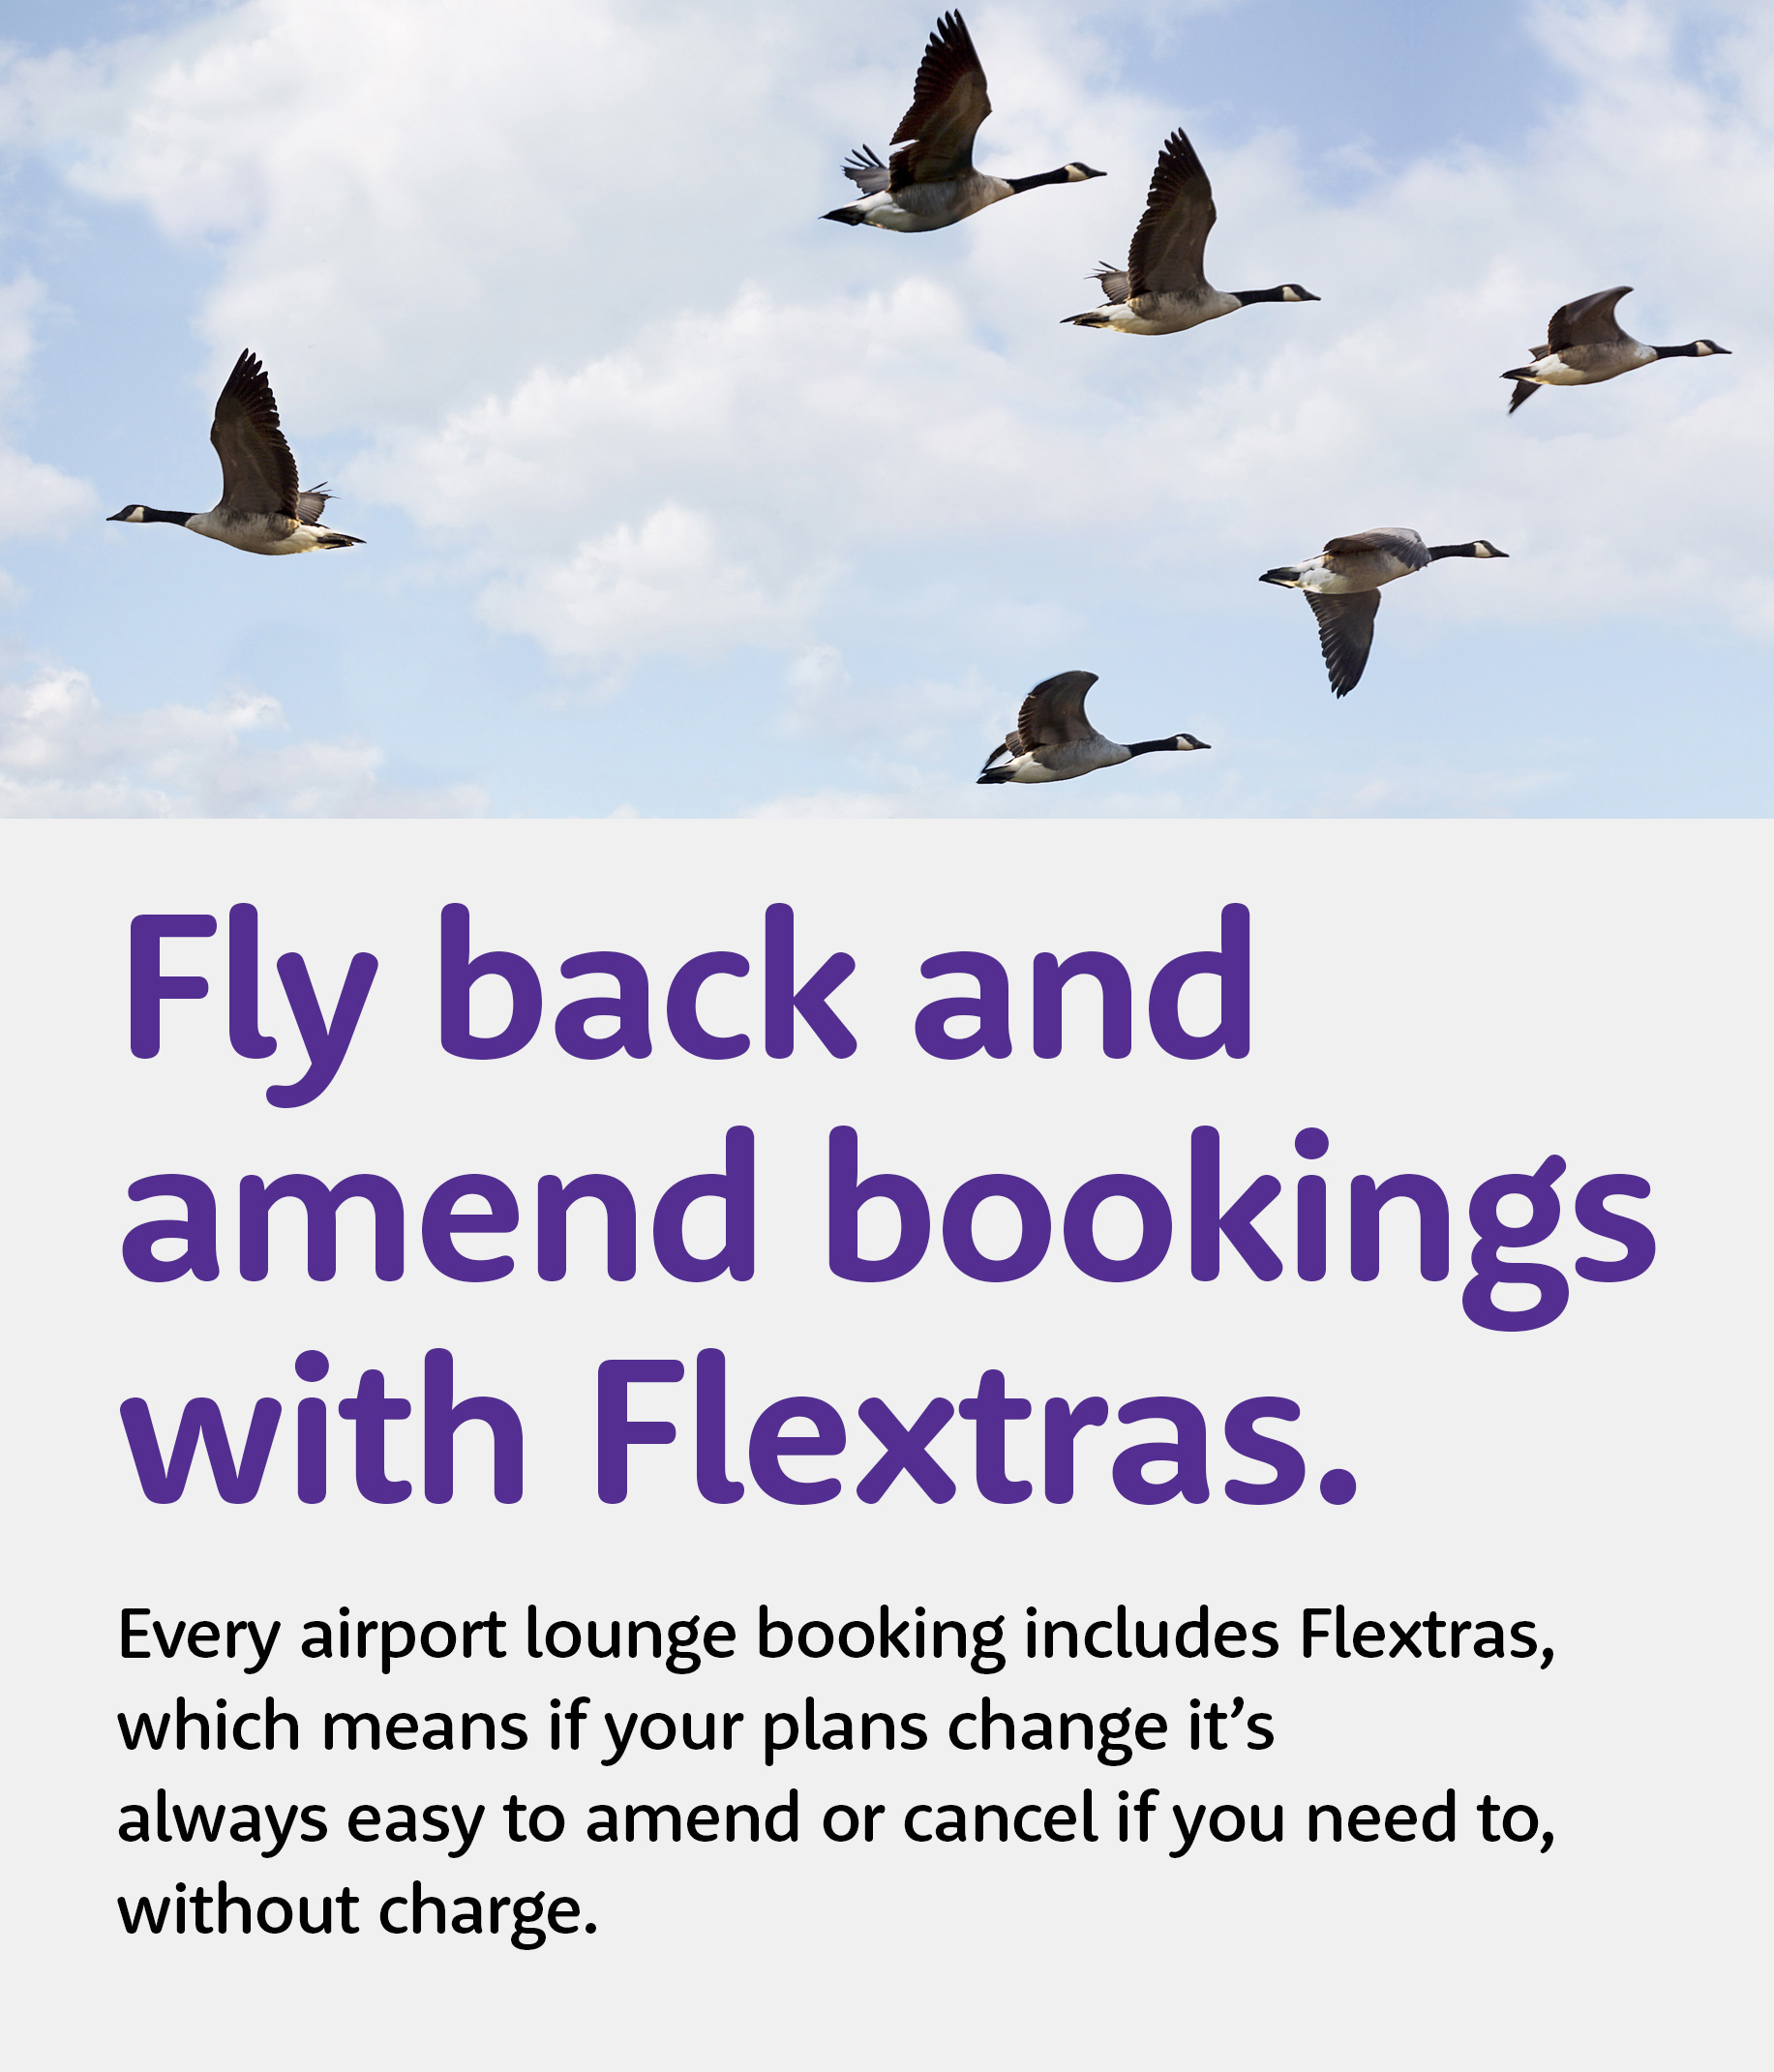 airport lounges all bookings include flextras